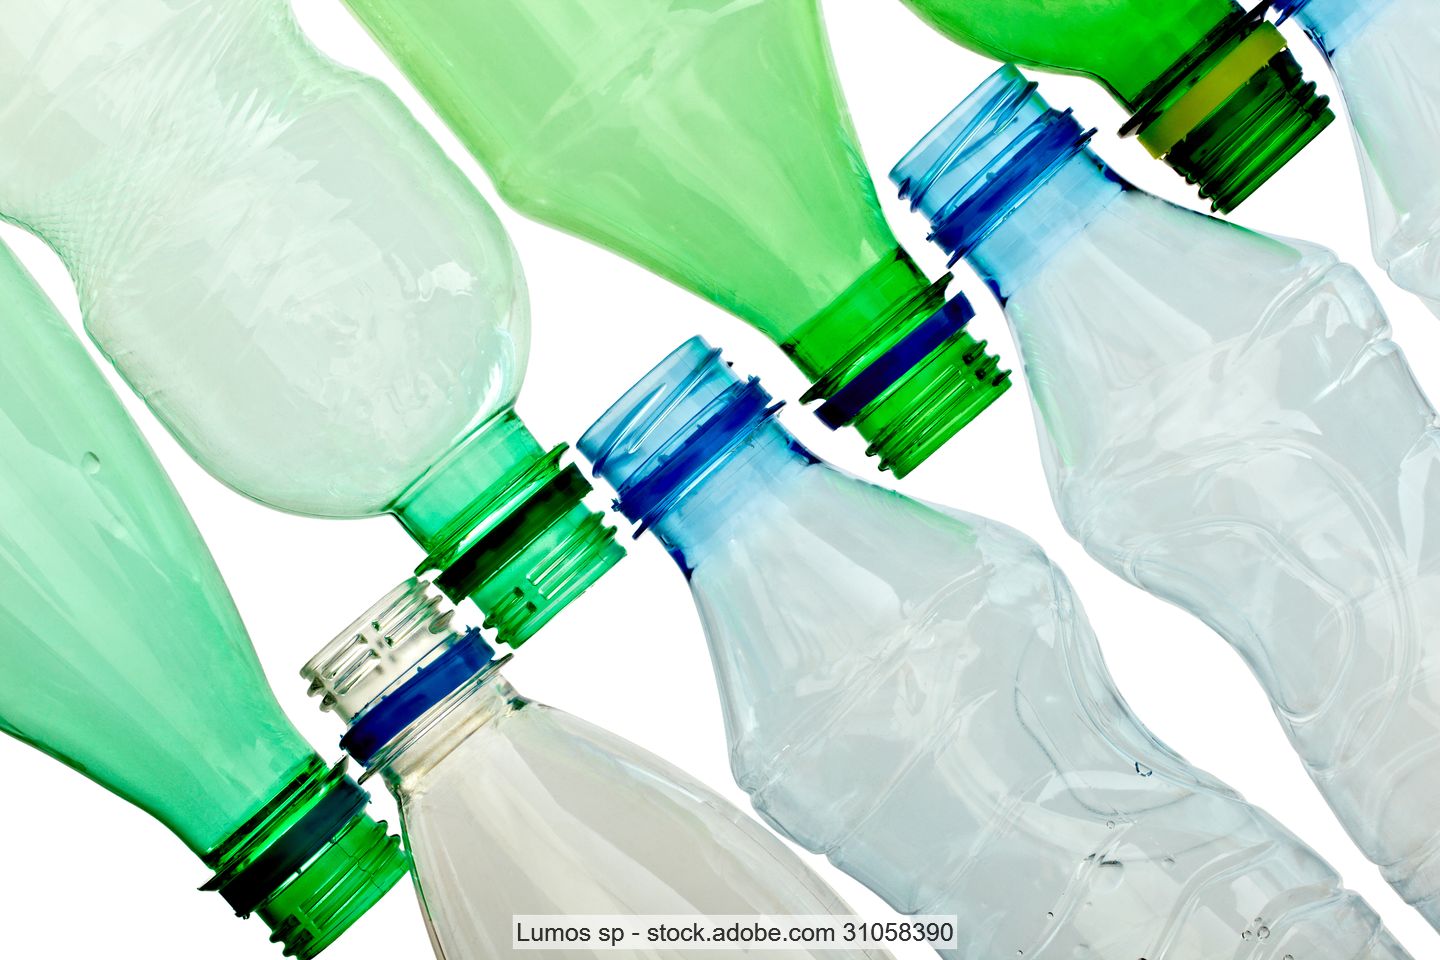 capless clear, blue and green PET bottles lined up neck to neck